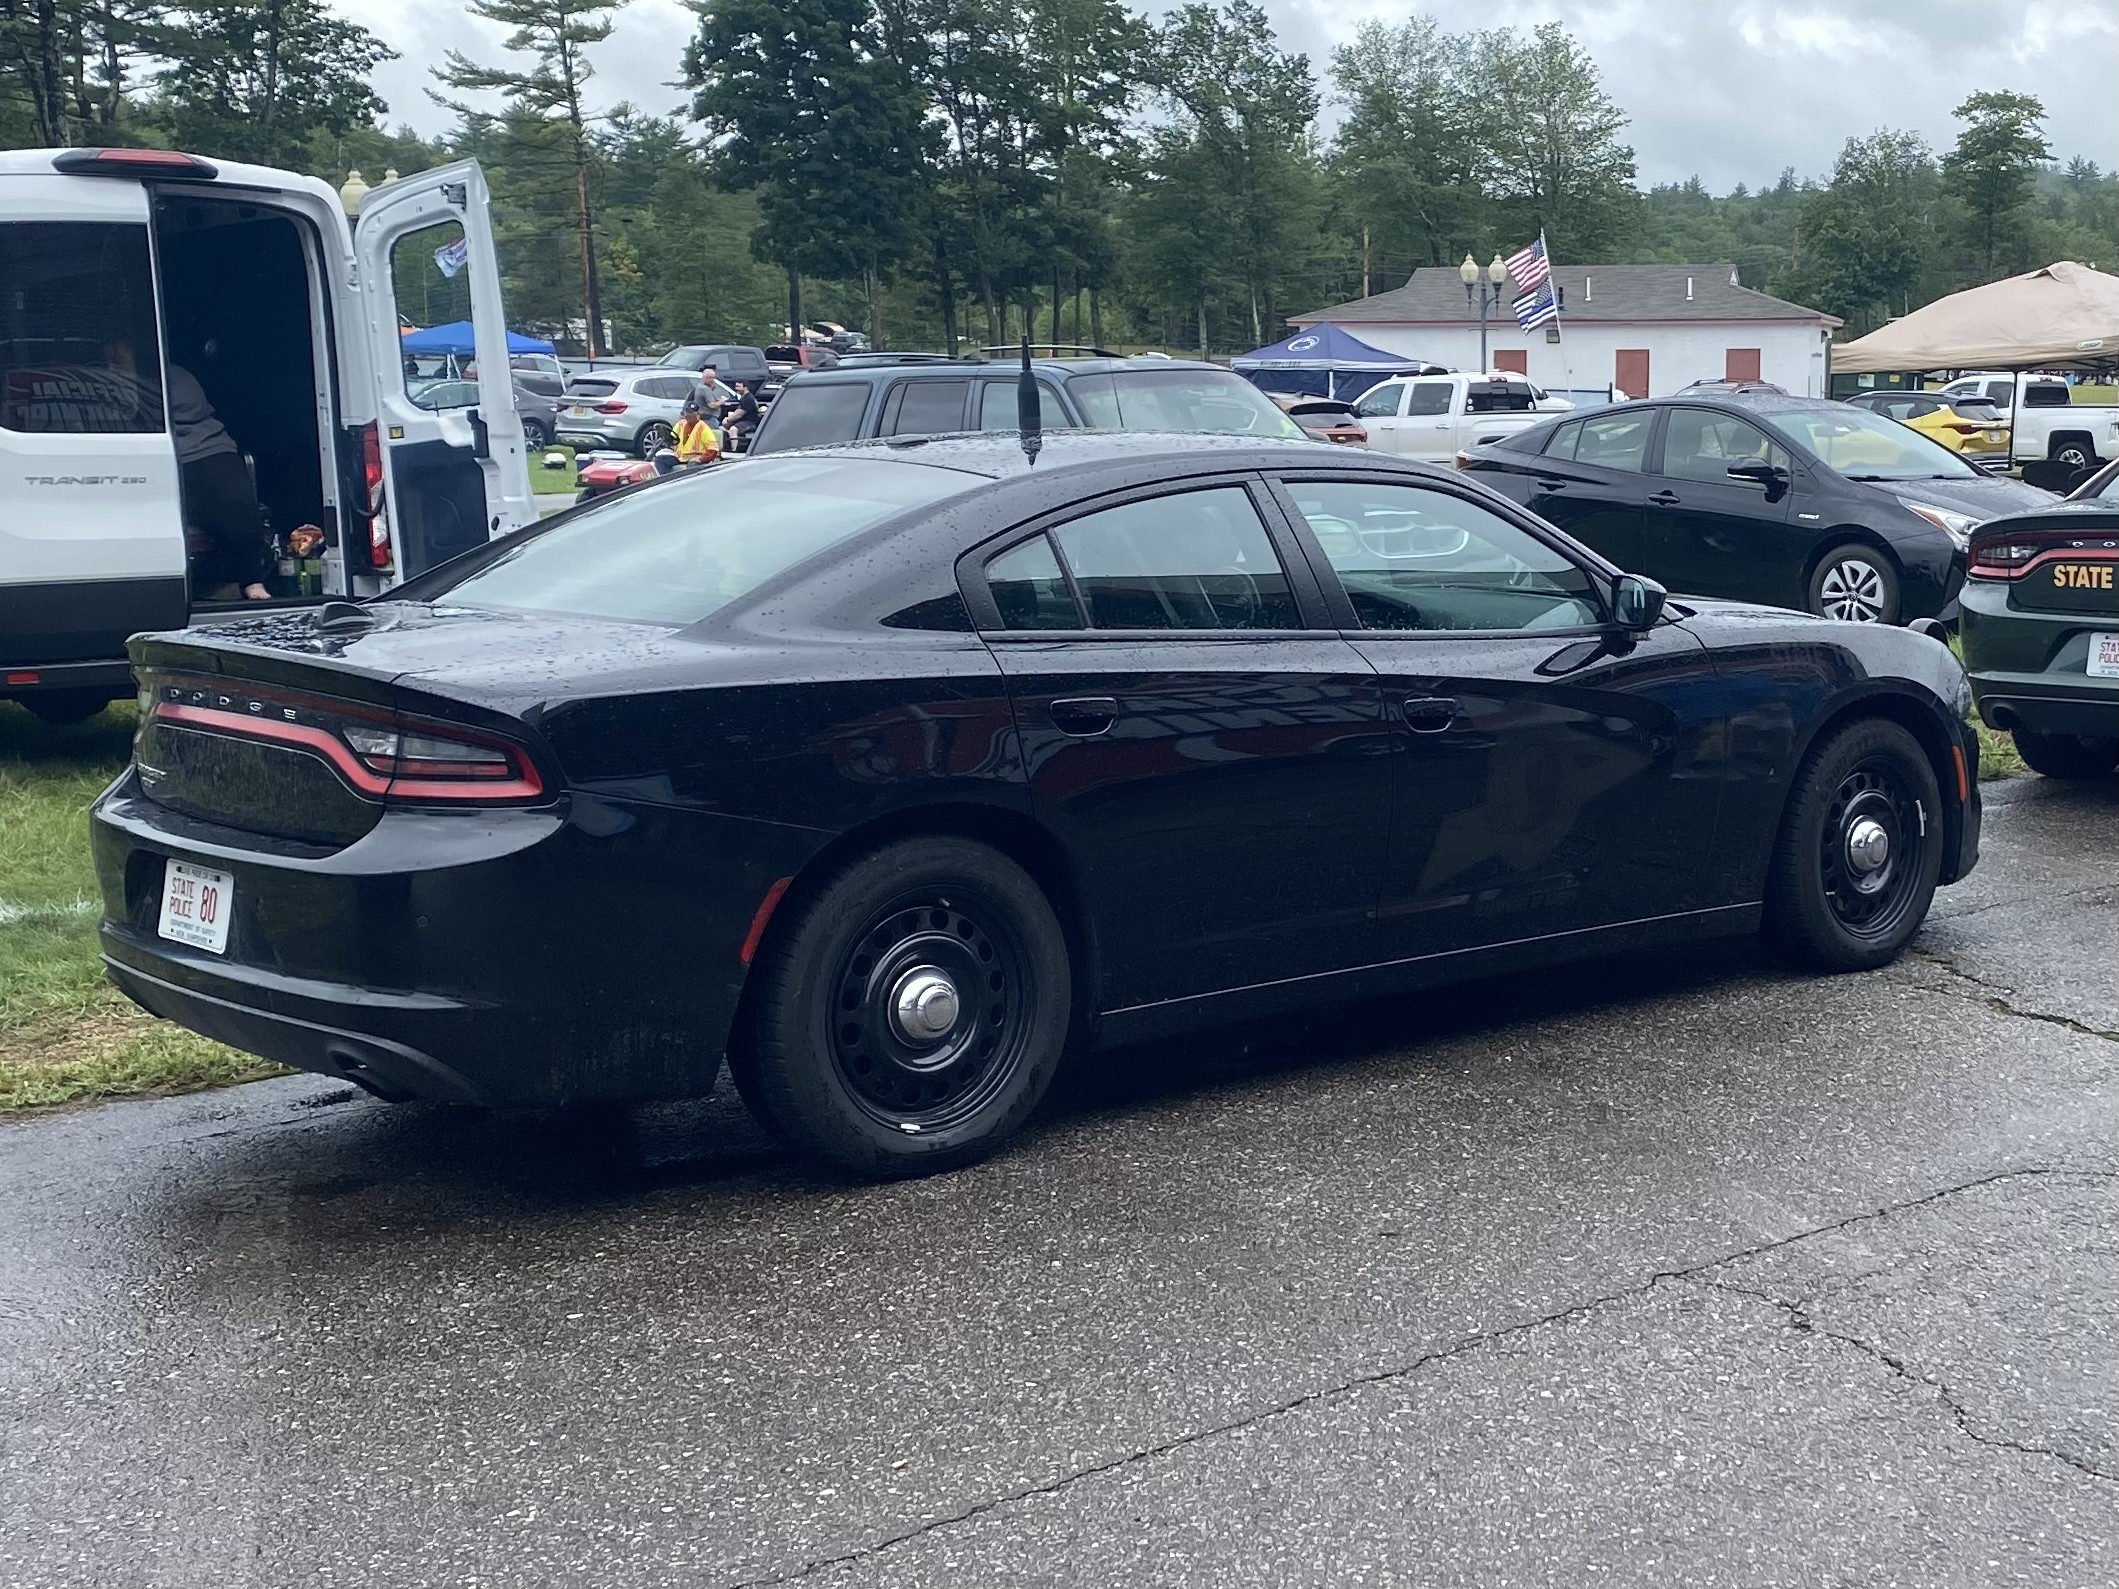 A photo  of New Hampshire State Police
            Cruiser 80, a 2017-2019 Dodge Charger             taken by @riemergencyvehicles